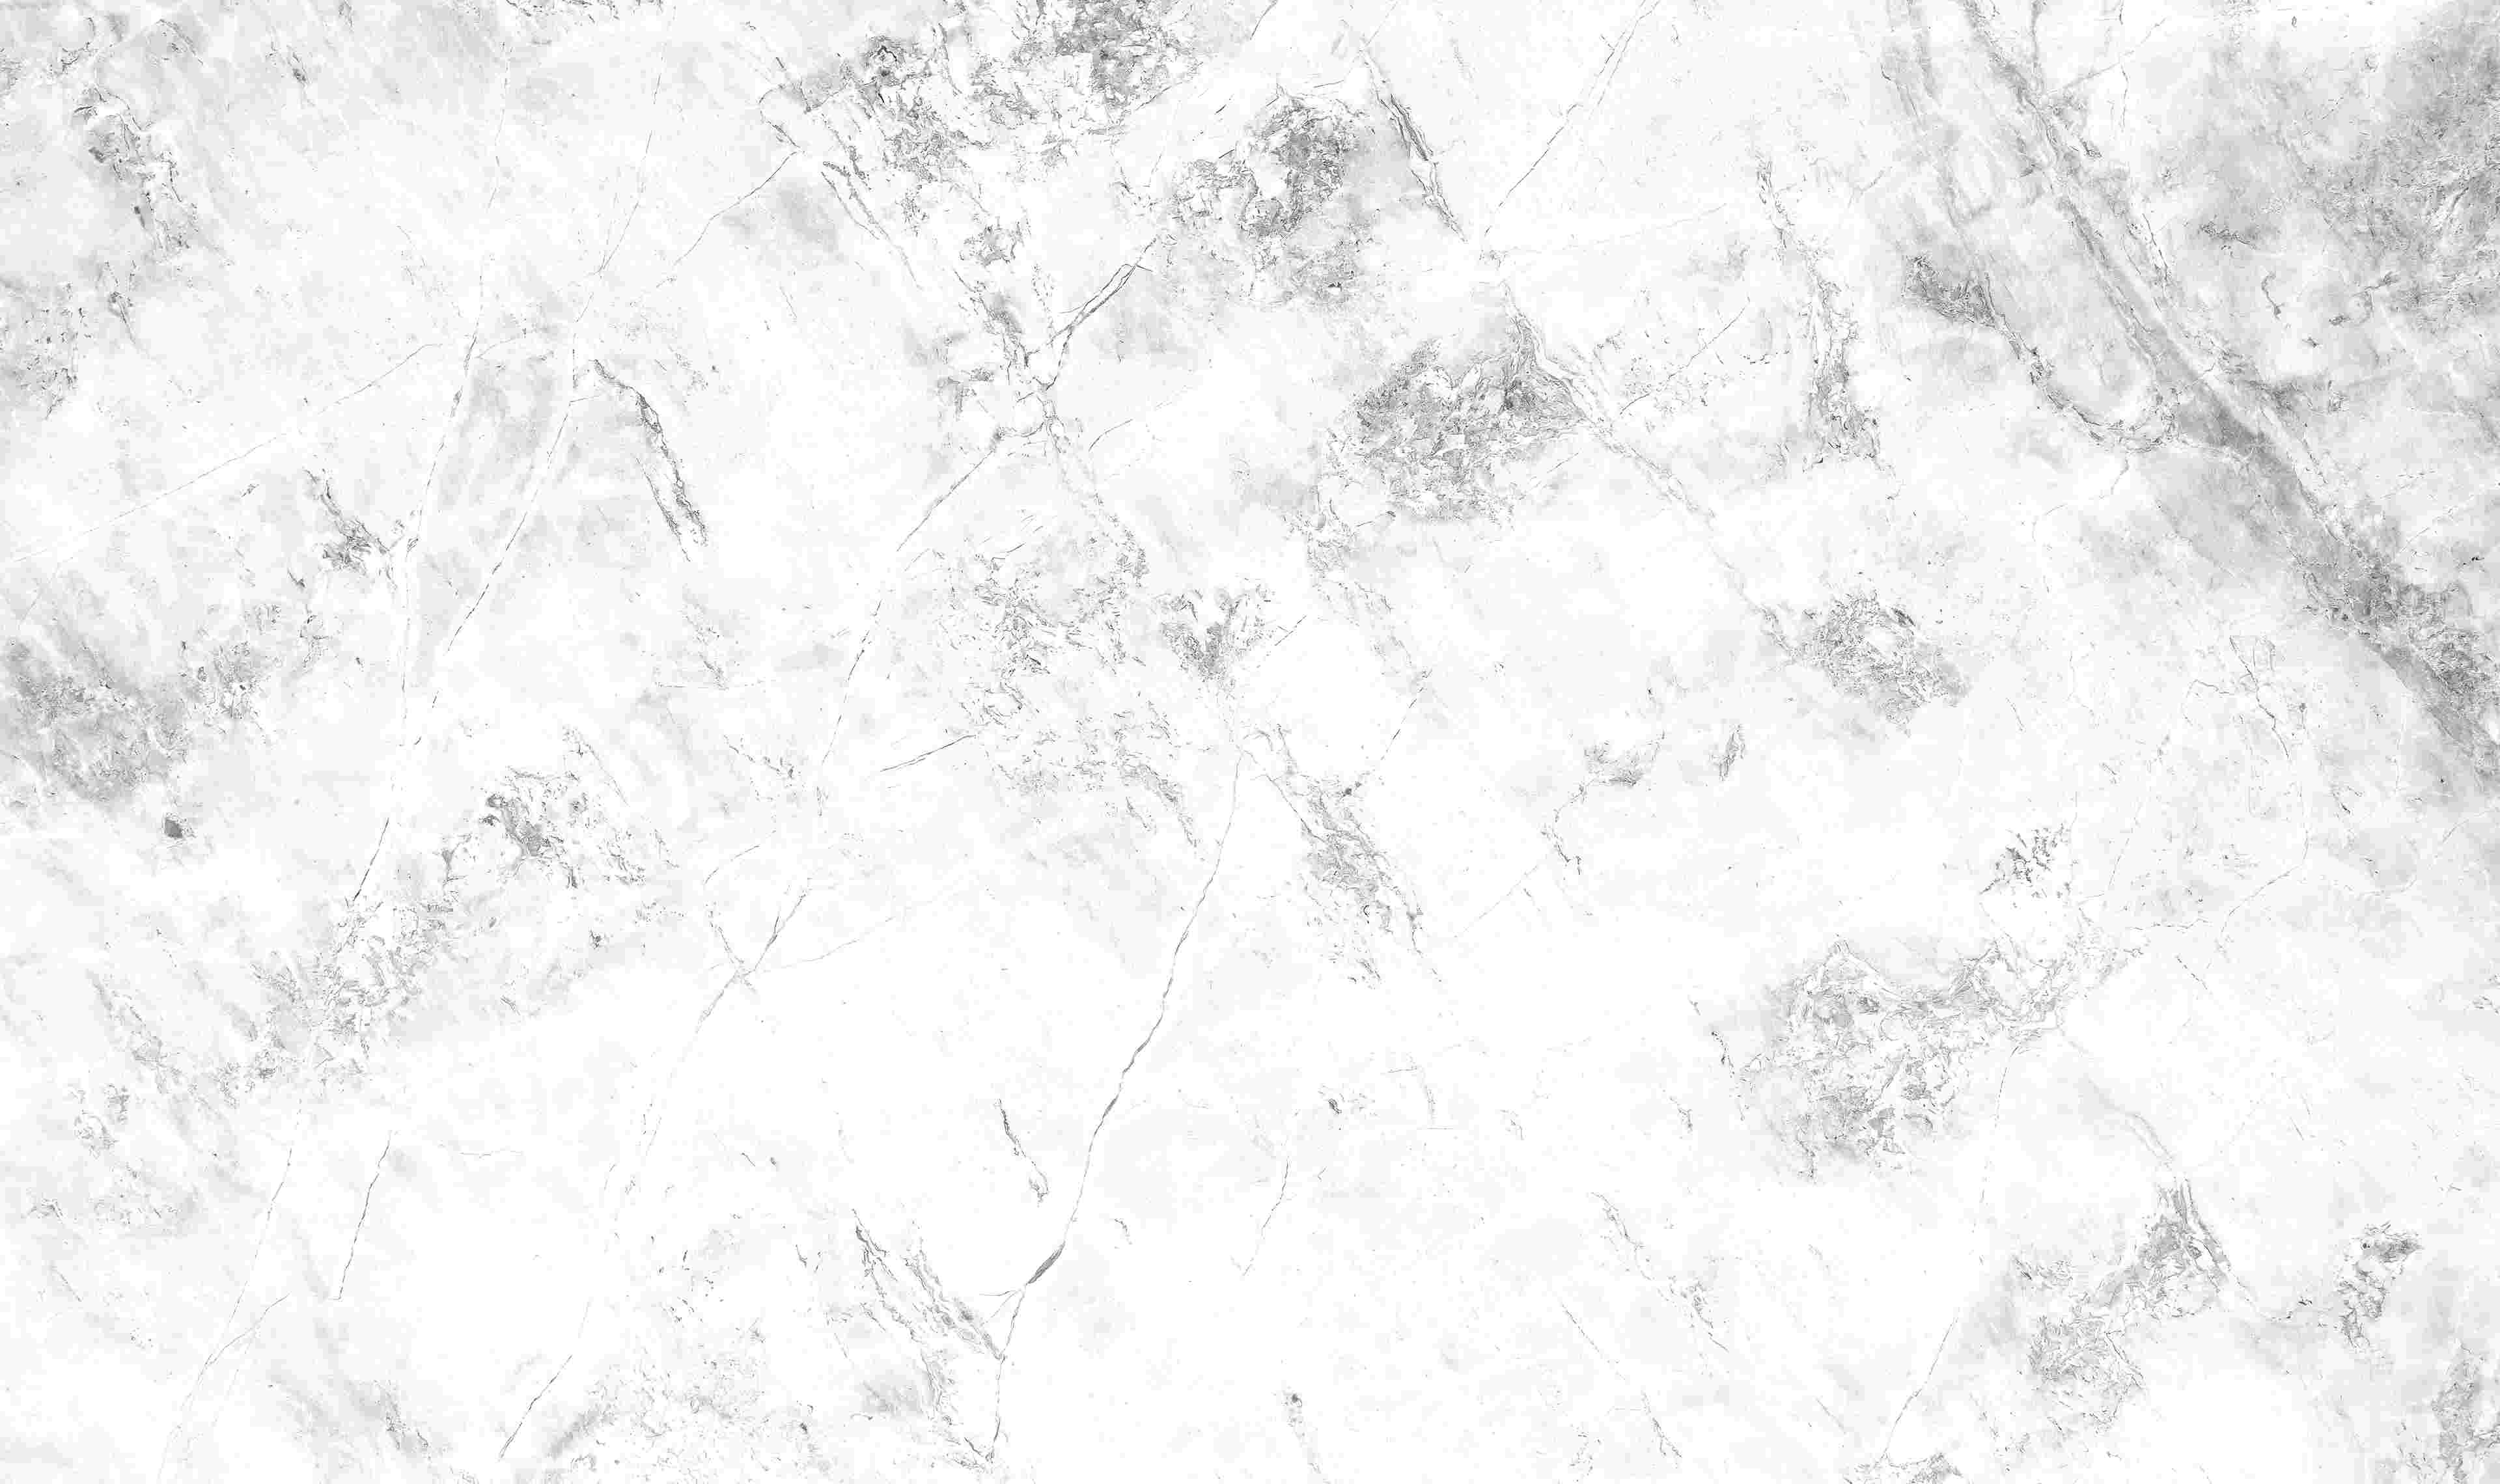 Decorative background image of a marble texture.